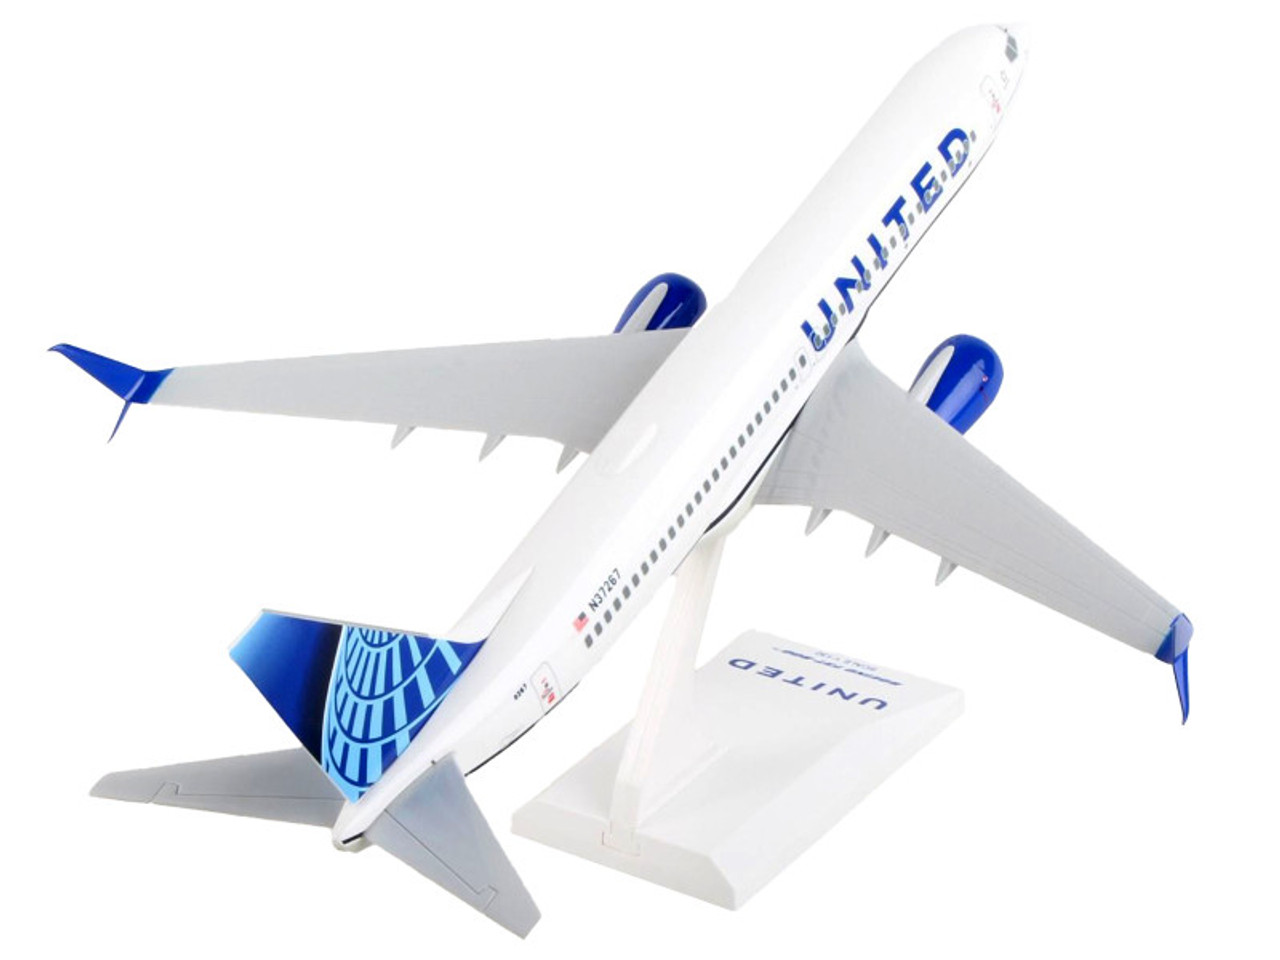 Boeing 737-800 Commercial Aircraft with Wi-Fi Dome "United Airlines" (N37267) White with Blue Tail (Snap-Fit) 1/130 Plastic Model by Skymarks